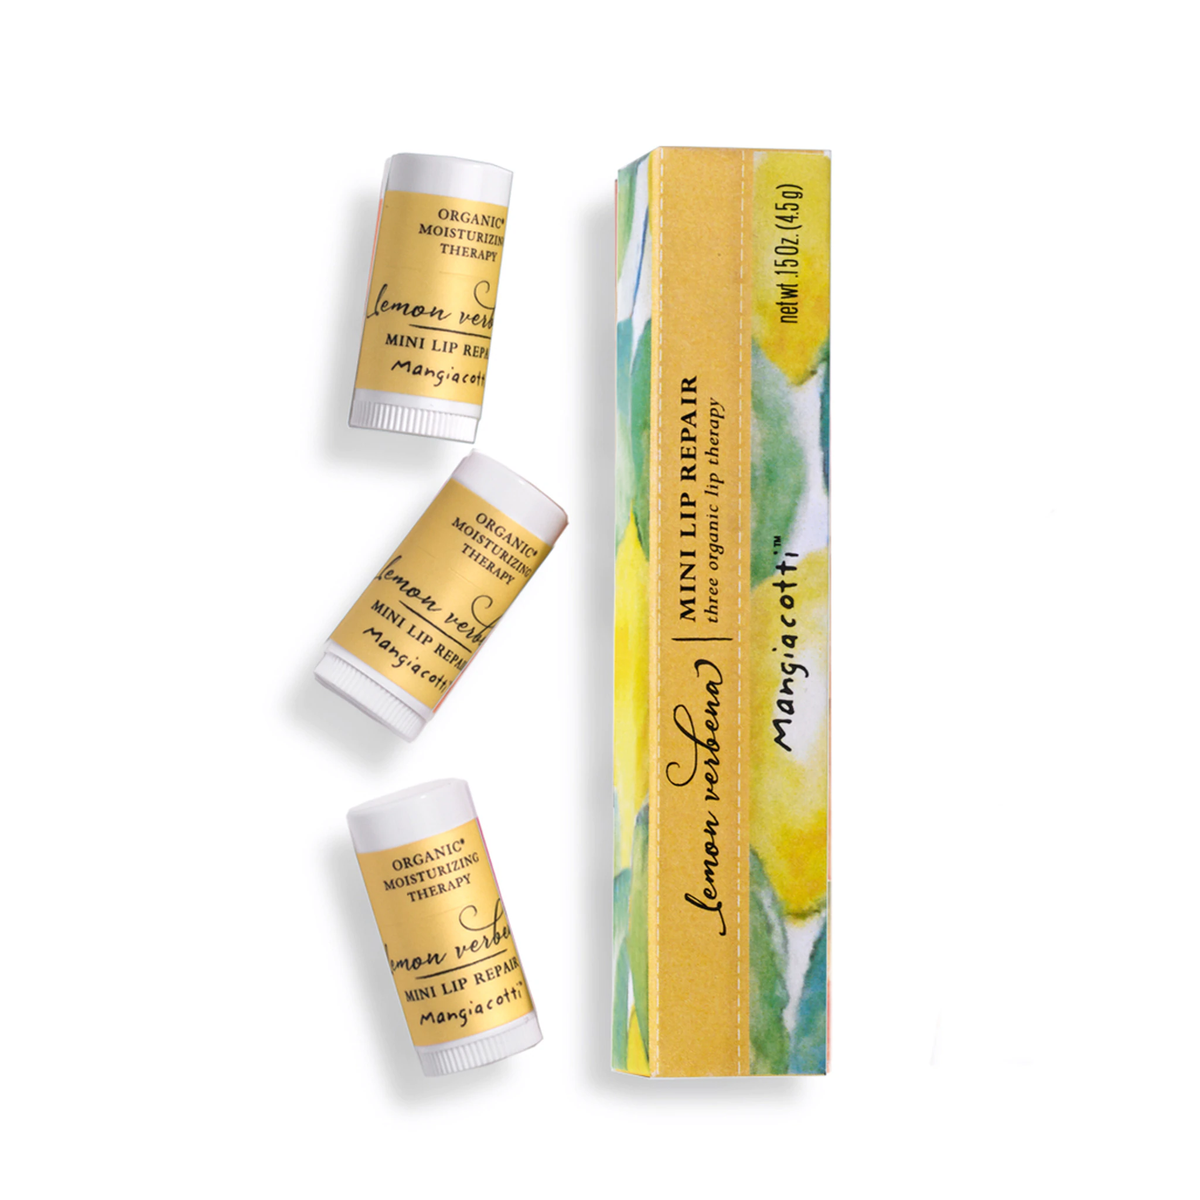 Three Mangiacotti Lemon Verbena Mini Lip Repair lip balms alongside their yellow and green watercolor patterned packaging box, all displayed against a white background.